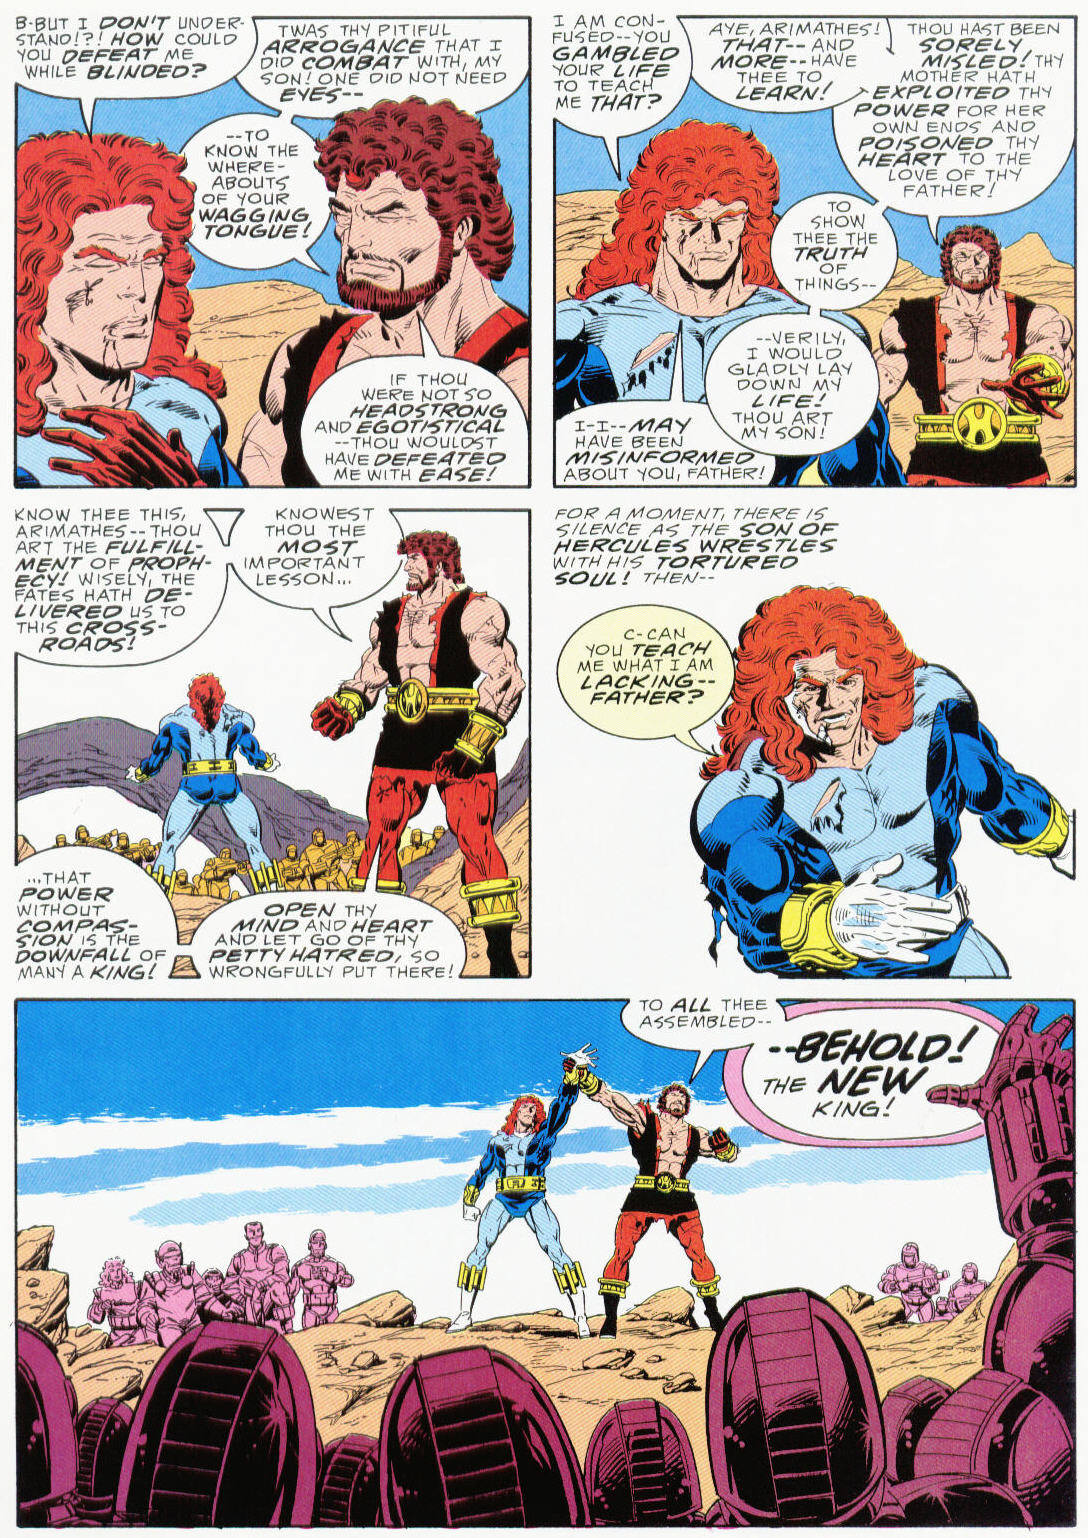 Marvel Graphic Novel issue 37 - Hercules Prince of Power - Full Circle - Page 76